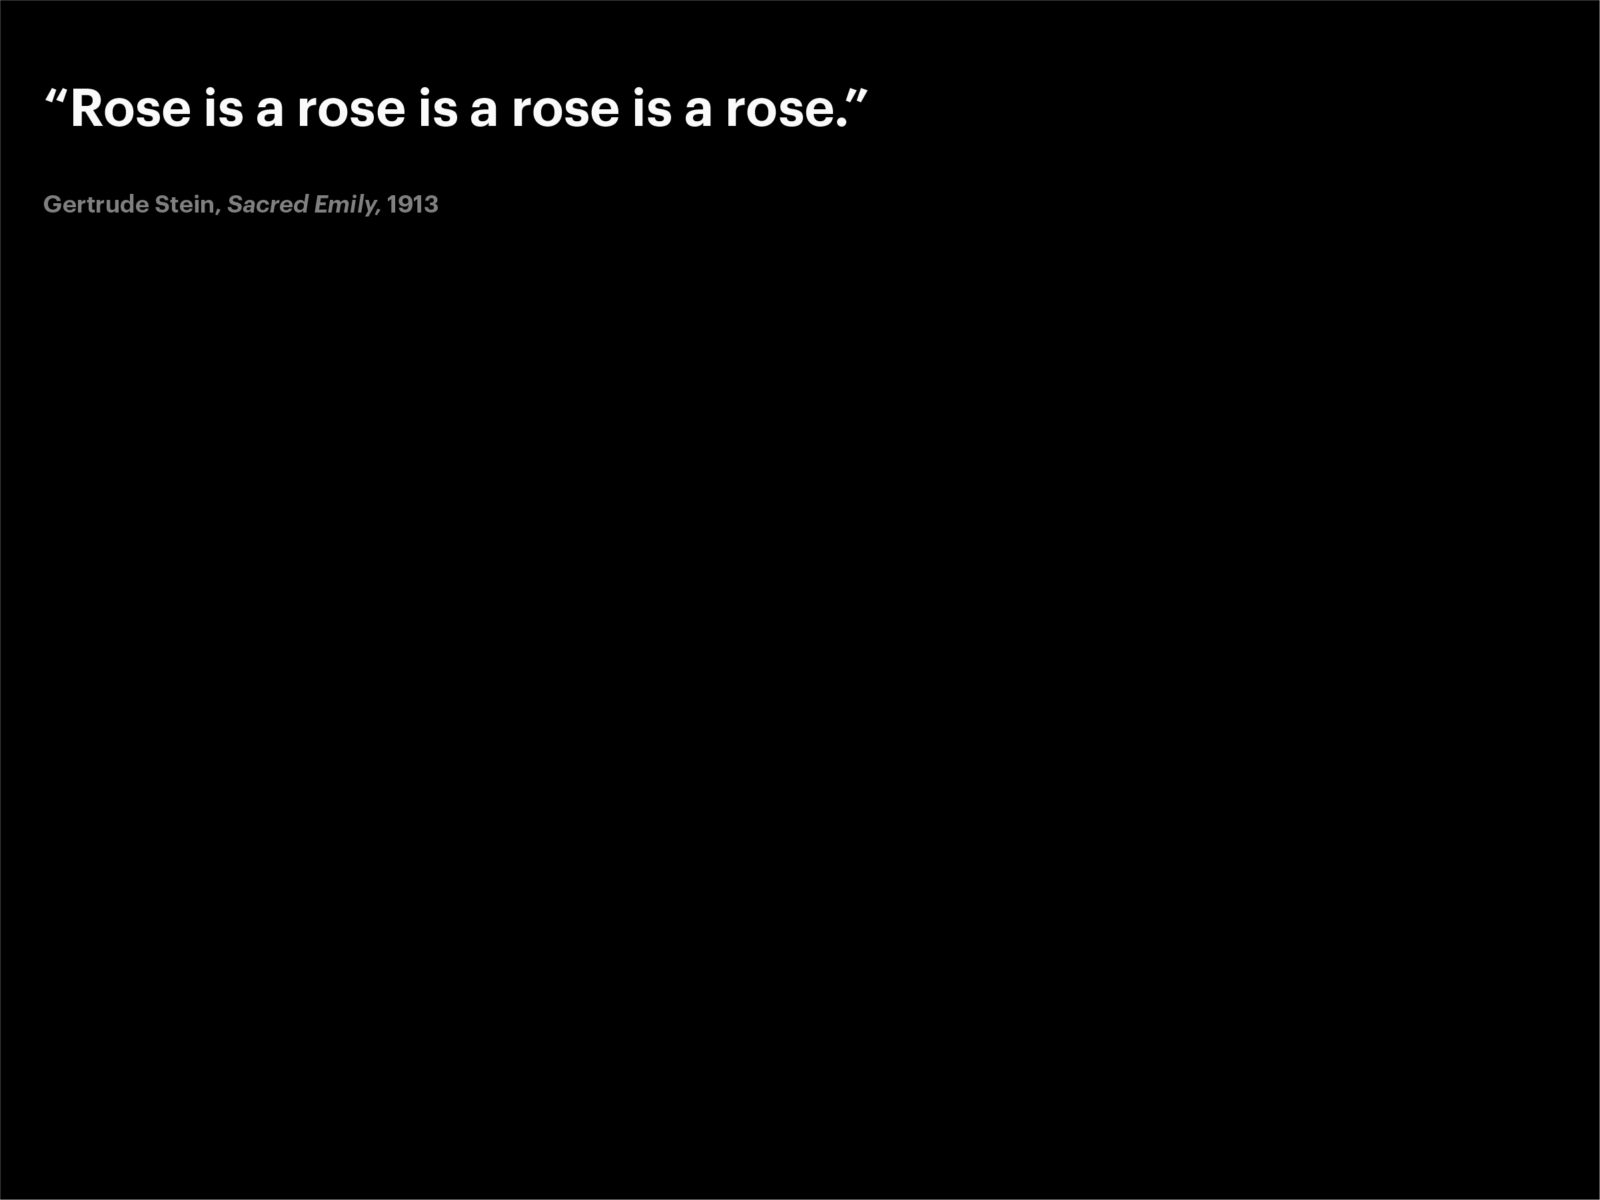 Imagining Science conceptual visual essay, rose is a rose is a rose